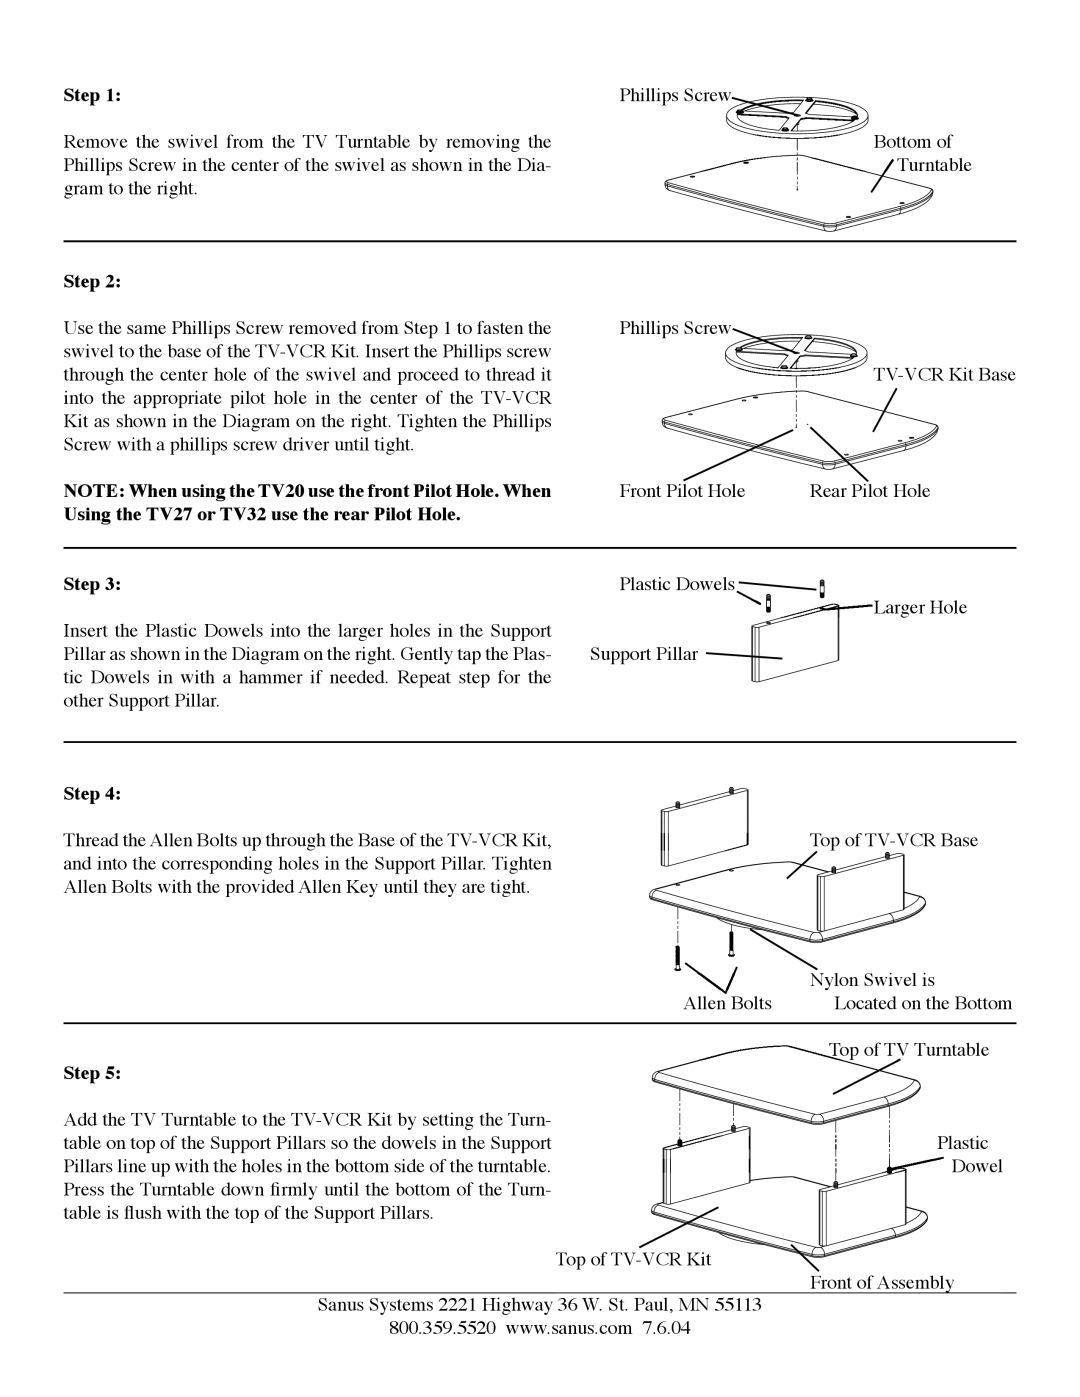 Sanus Systems TV-VCR, TV20, TV13 manual Using the TV27 or TV32 use the rear Pilot Hole, Step 